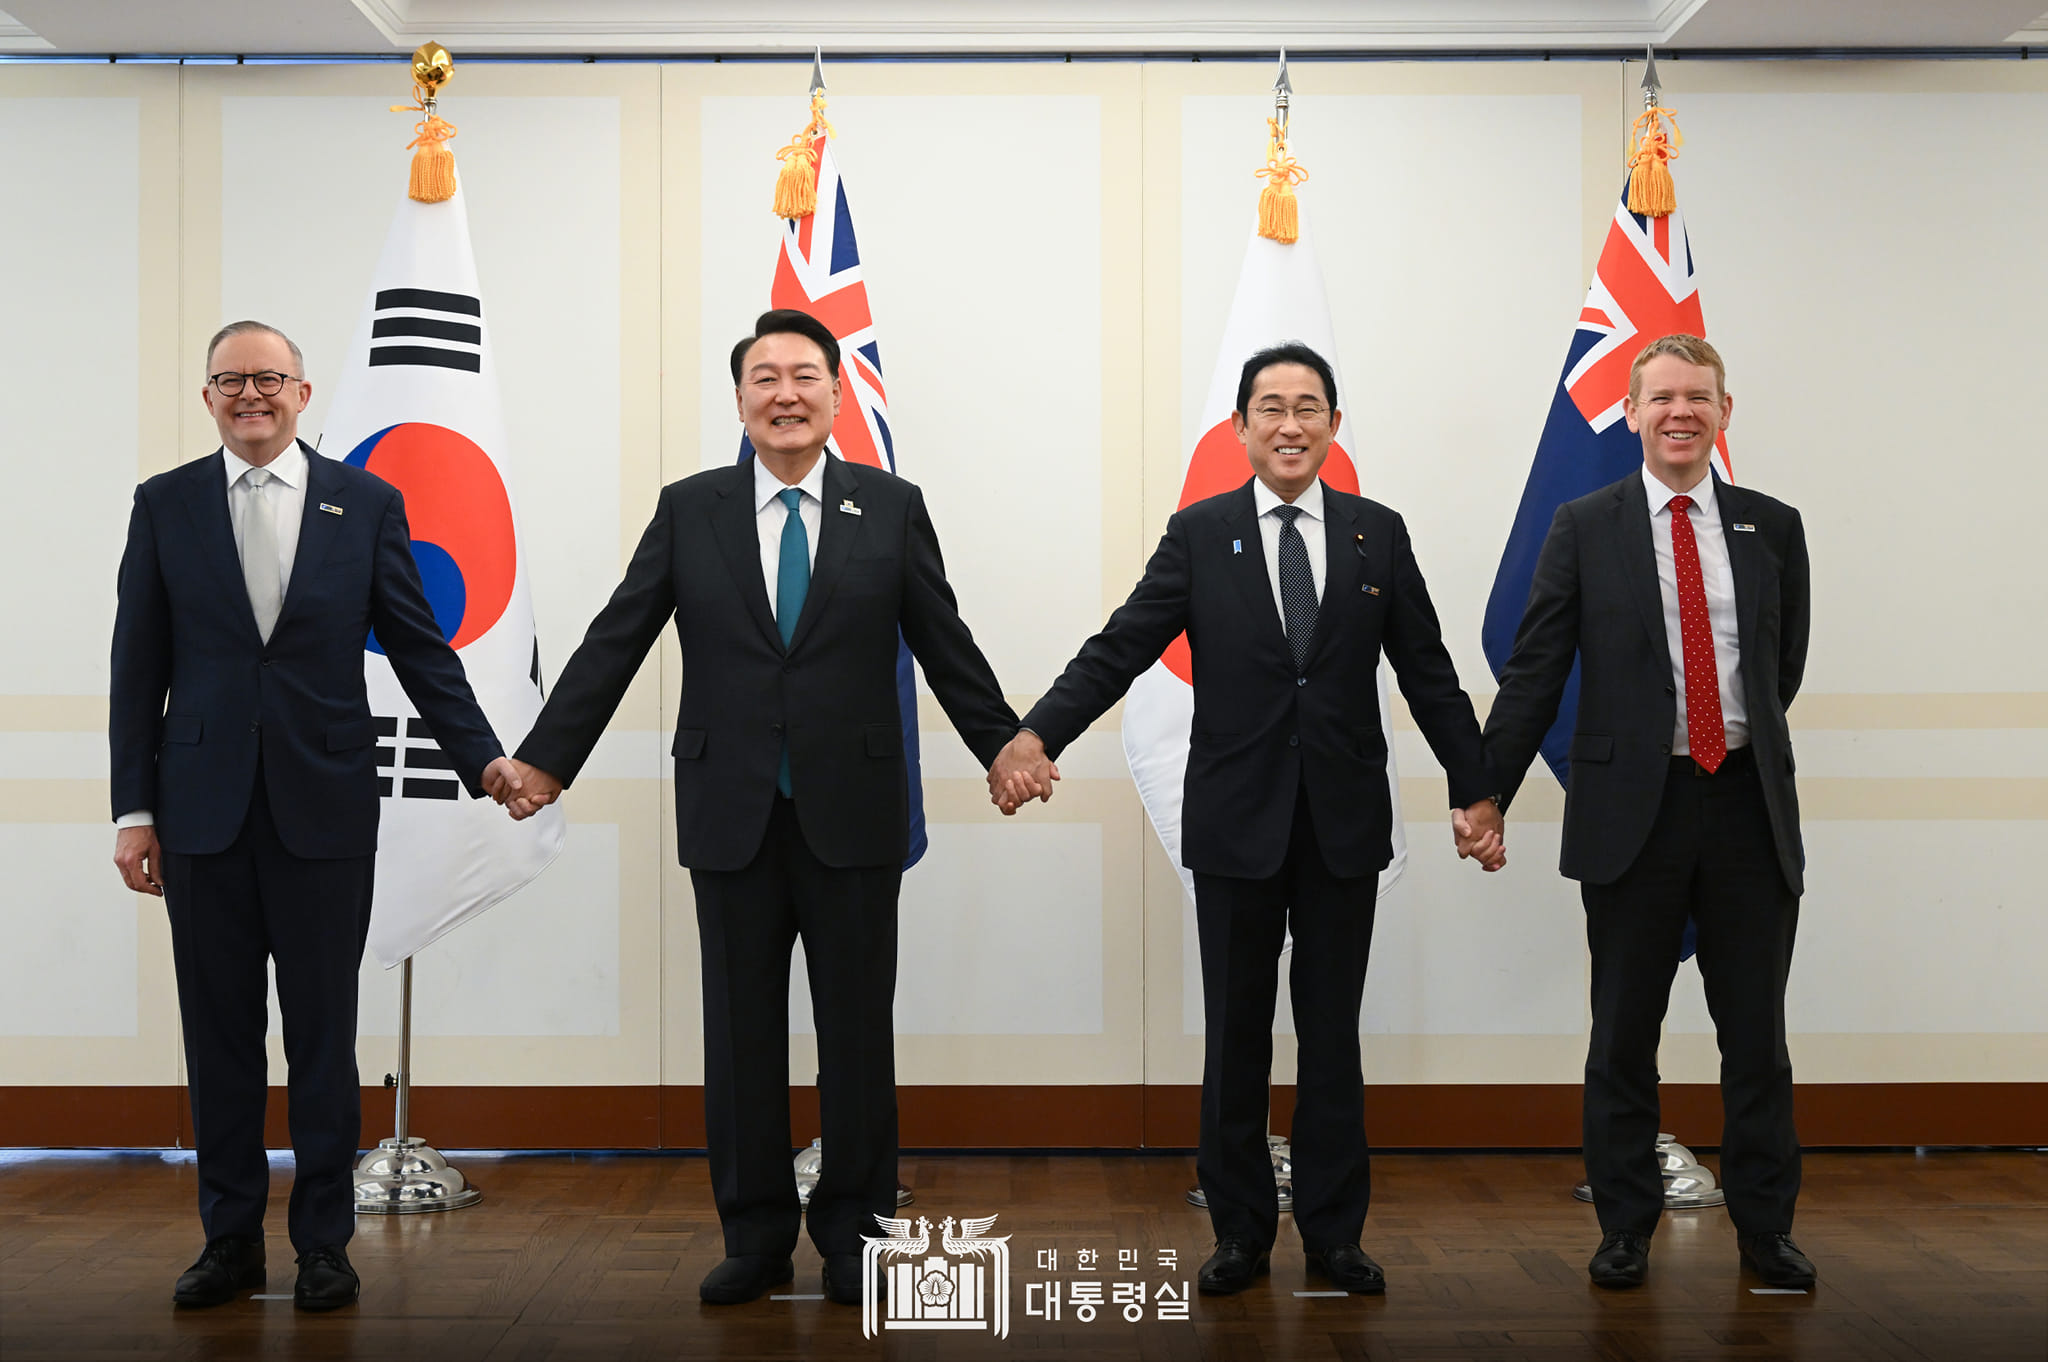 [Office of the President] Joint Statement of the Leaders of the Republic of Korea, Japan, Australia, and New Zealand